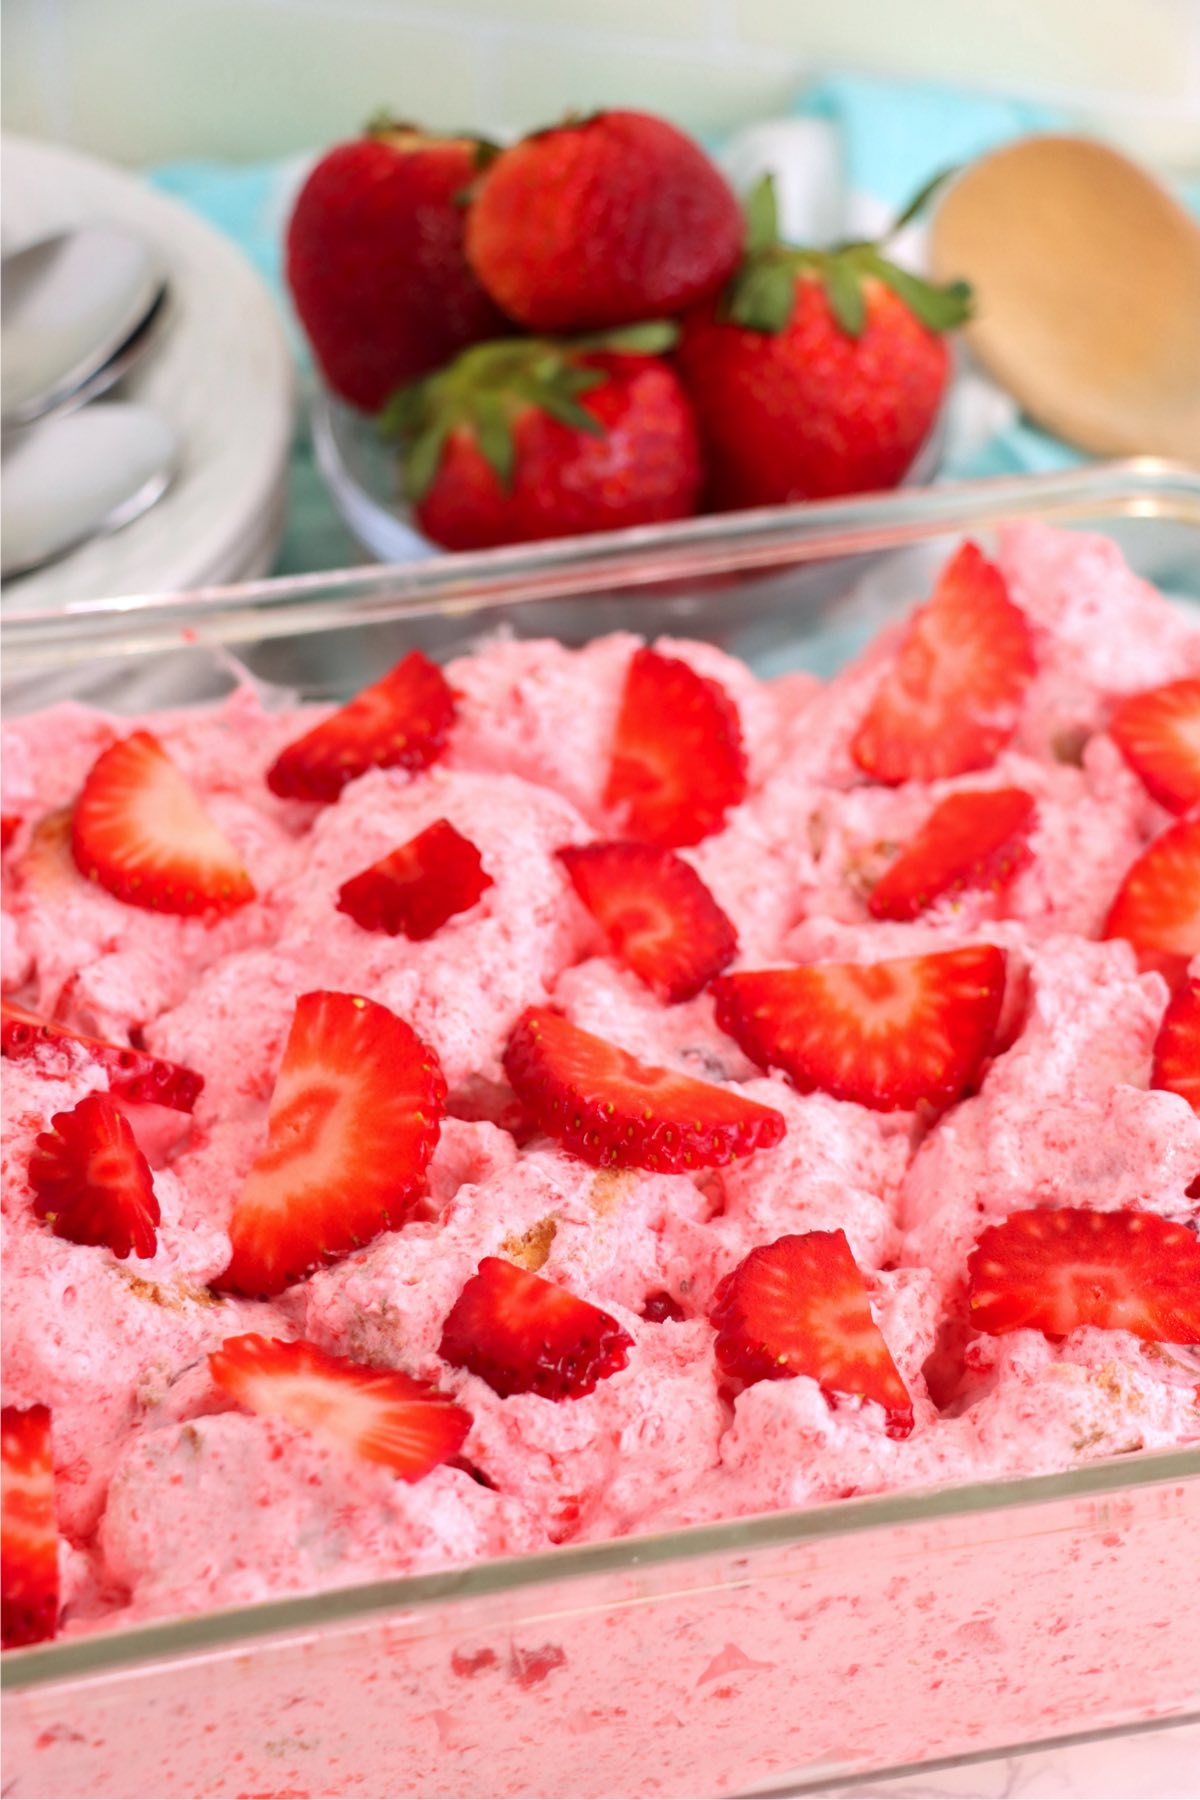 Glass cake pan filled with strawberry gelatin dessert and topped with fresh strawberries